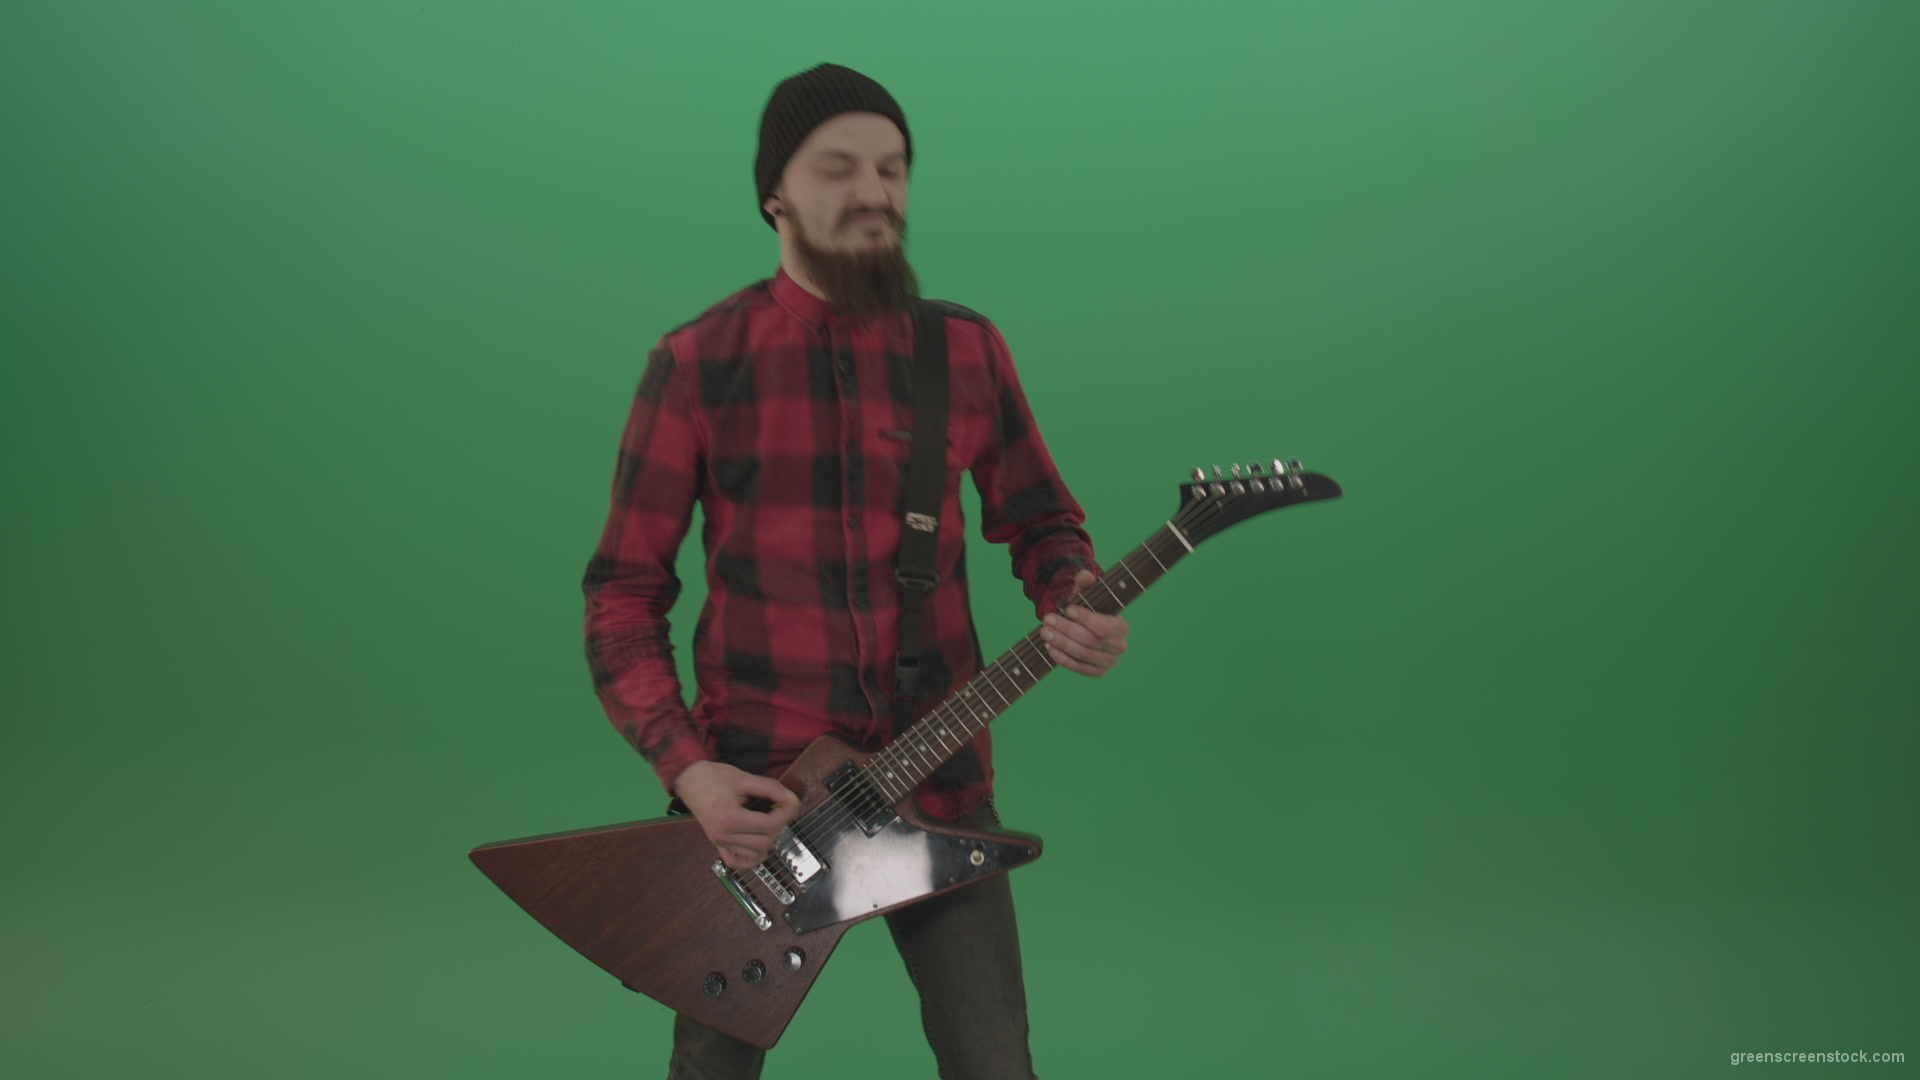 Old-man-with-beard-play-rock-guitar-isolated-on-green-screen-background-4K_001 Green Screen Stock